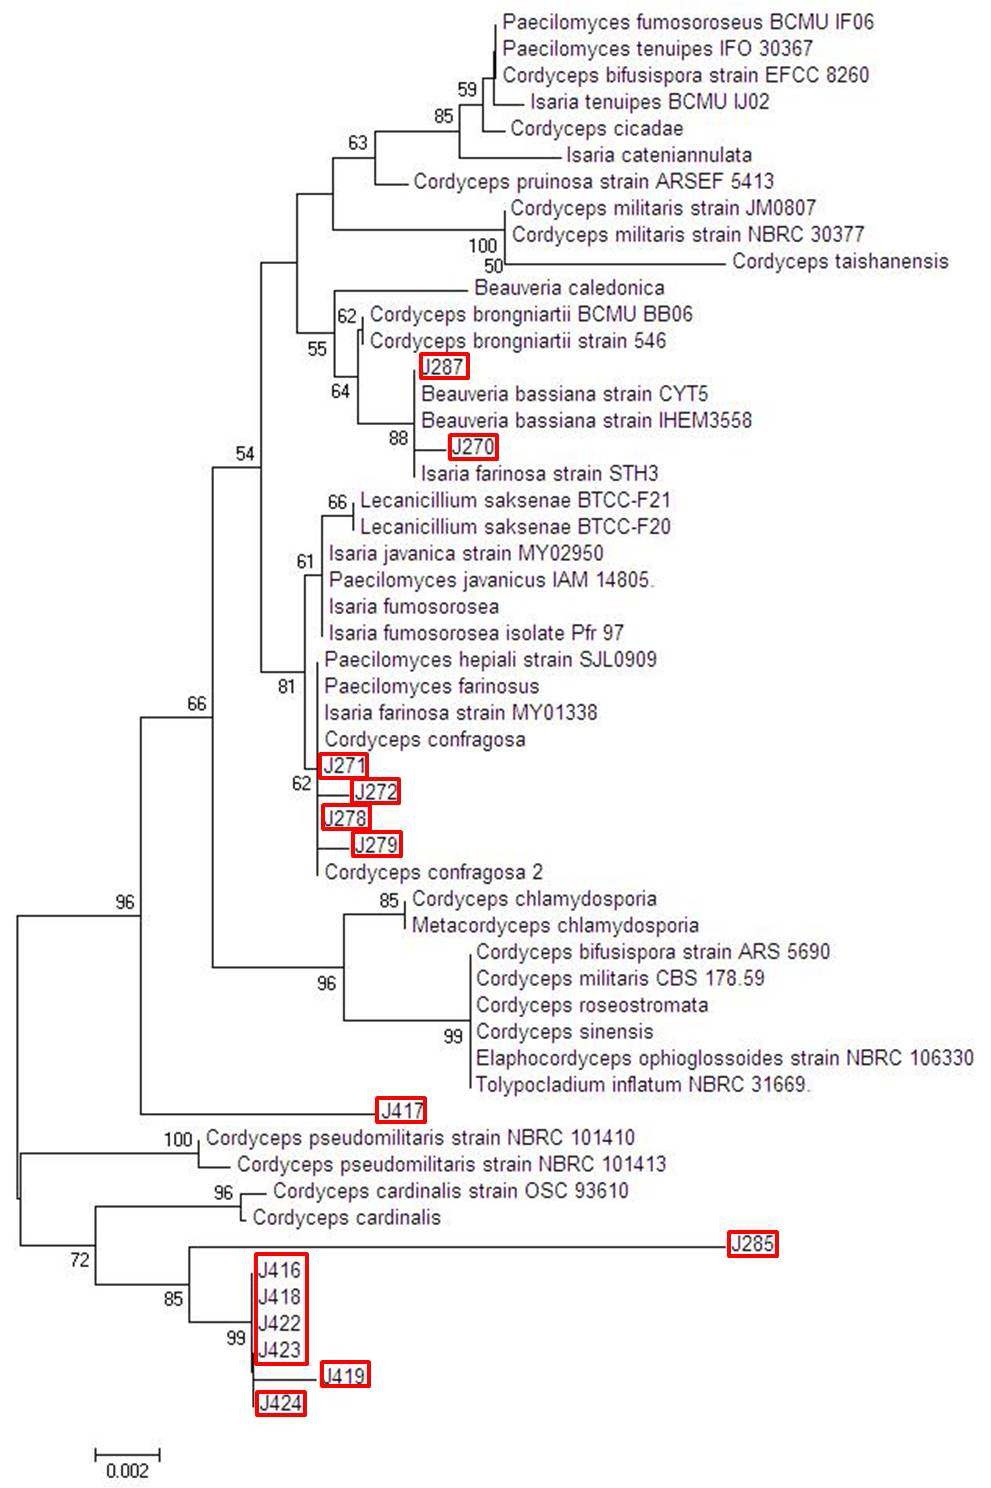 Phylogenetic tree of aligned DNA sequences of 14 entomopathogenic fungal isolates for nucleotide sequence variation of partial 18S rDNA region.